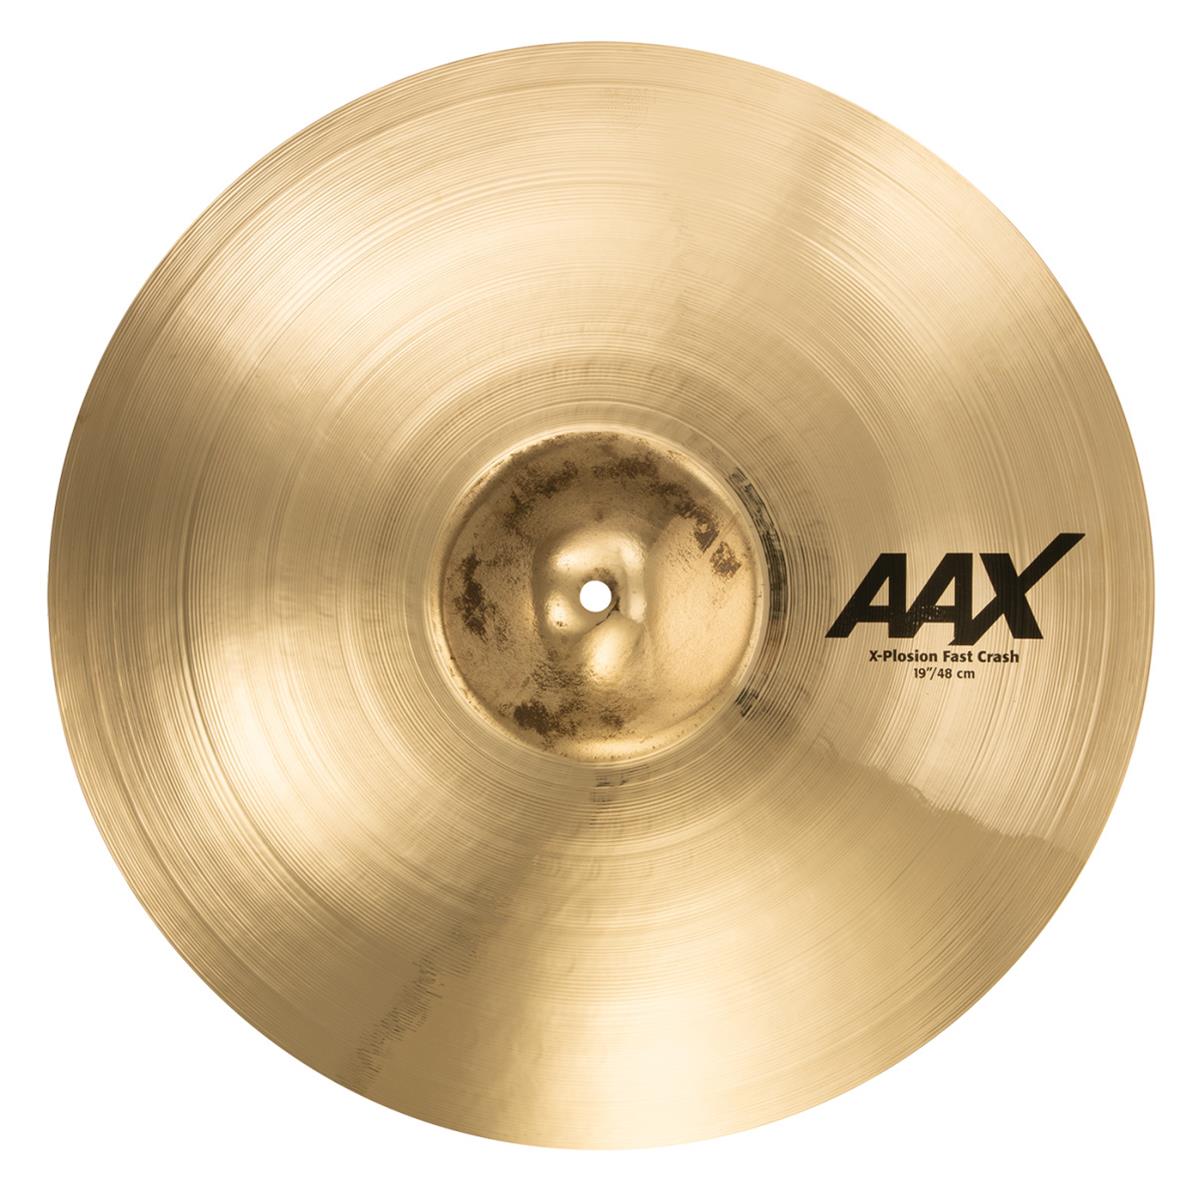 Sabian 19" AAX X-Plosion Fast Crash Cymbal, Extra-Thin, Brilliant Super-fast, with full, explosive response, the Sabian 19" AAX X-Plosion Fast Crash redefines the power potential for Tner cymbals with even faster, punchier accents at all volume levels. The Sabian AAX series delivers consistently bright, crisp, clear and cutting responses - AAX is the ultimate Modern Bright sound!